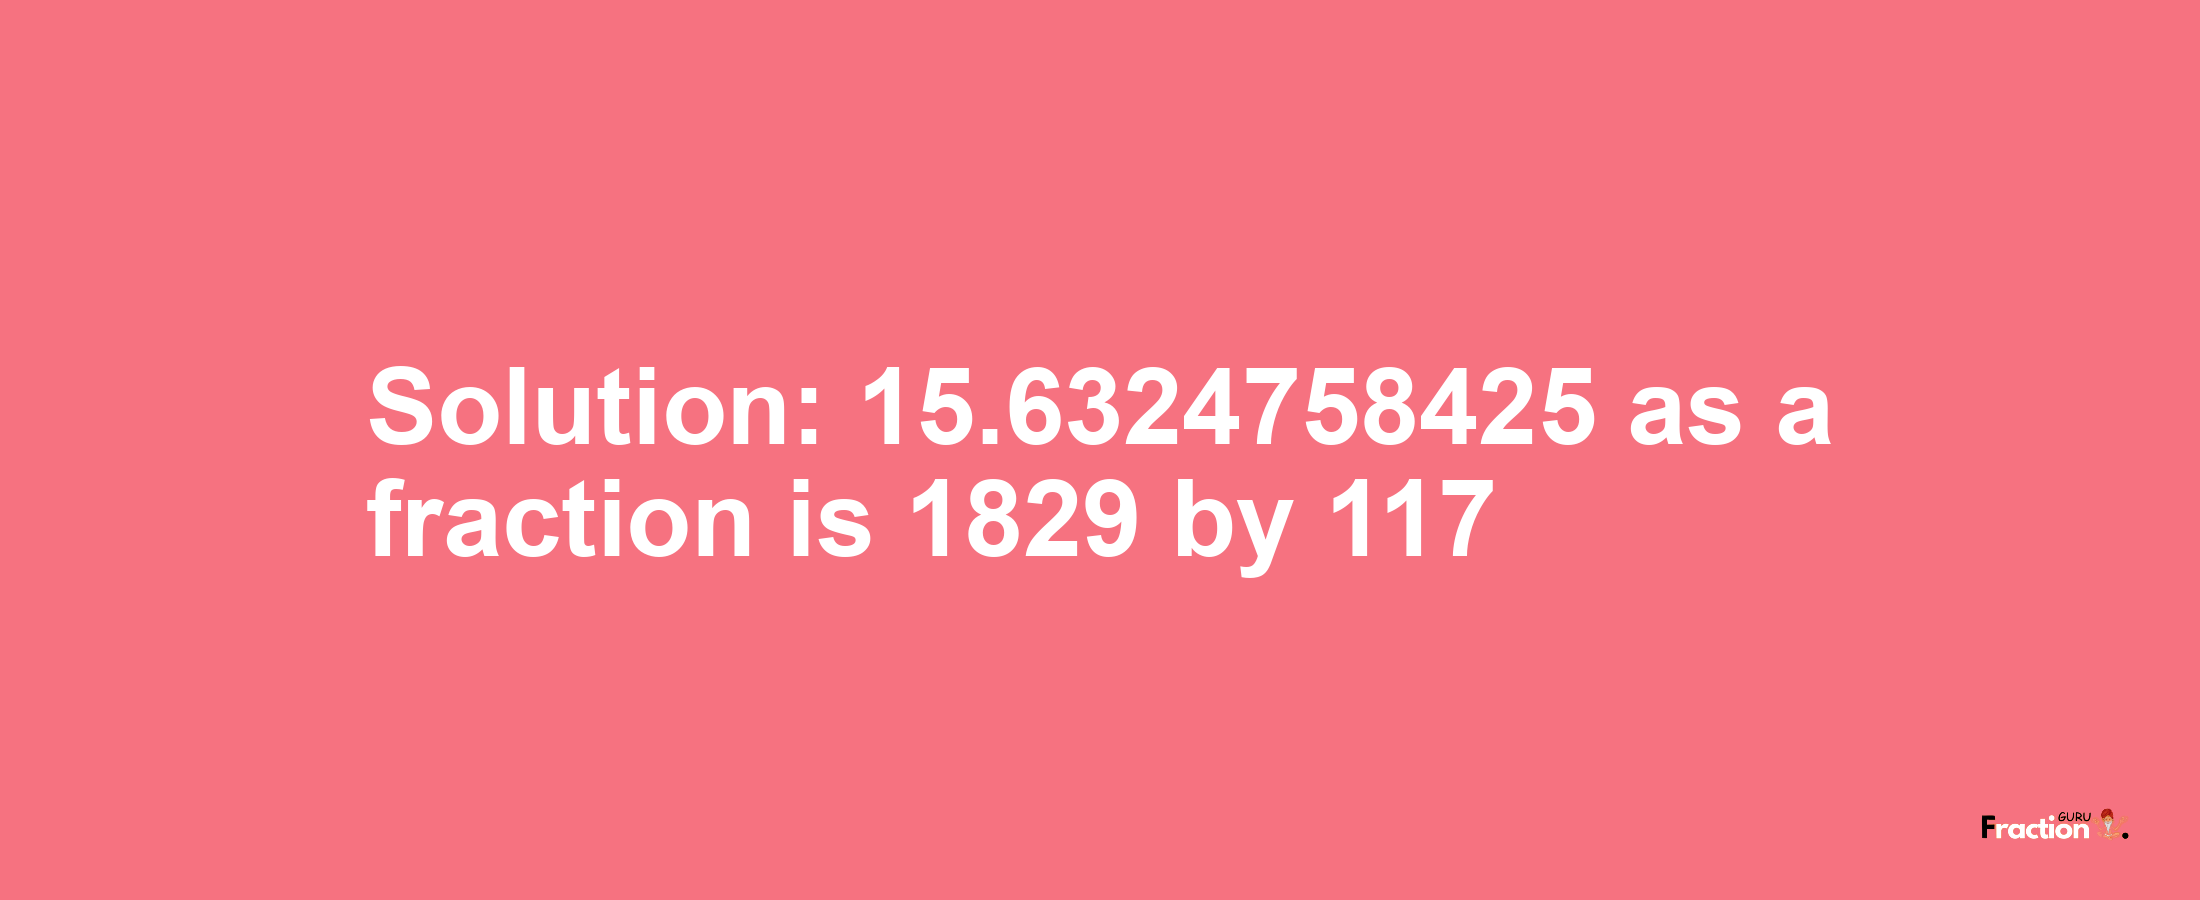 Solution:15.6324758425 as a fraction is 1829/117